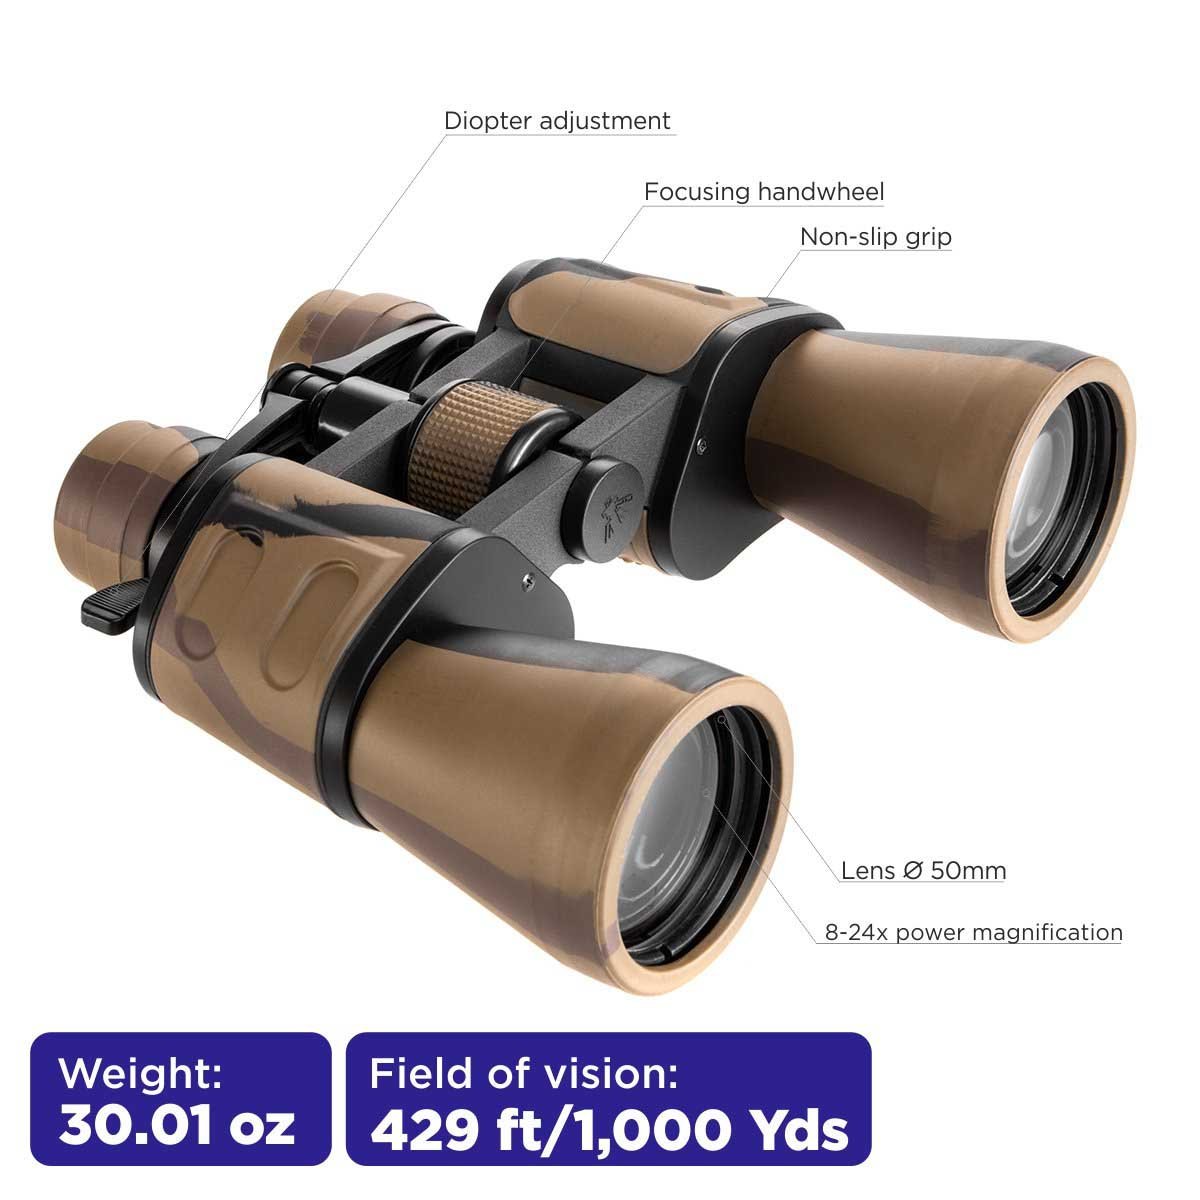 8-24x50 Hunter's Binocular with Travel Case weighs 30 oz, its field of vision stands for thousand yards. It boasts a non-slip grip, diopter adjustment, 50 mm lens, 8-24x magnification and a focusing handwheel